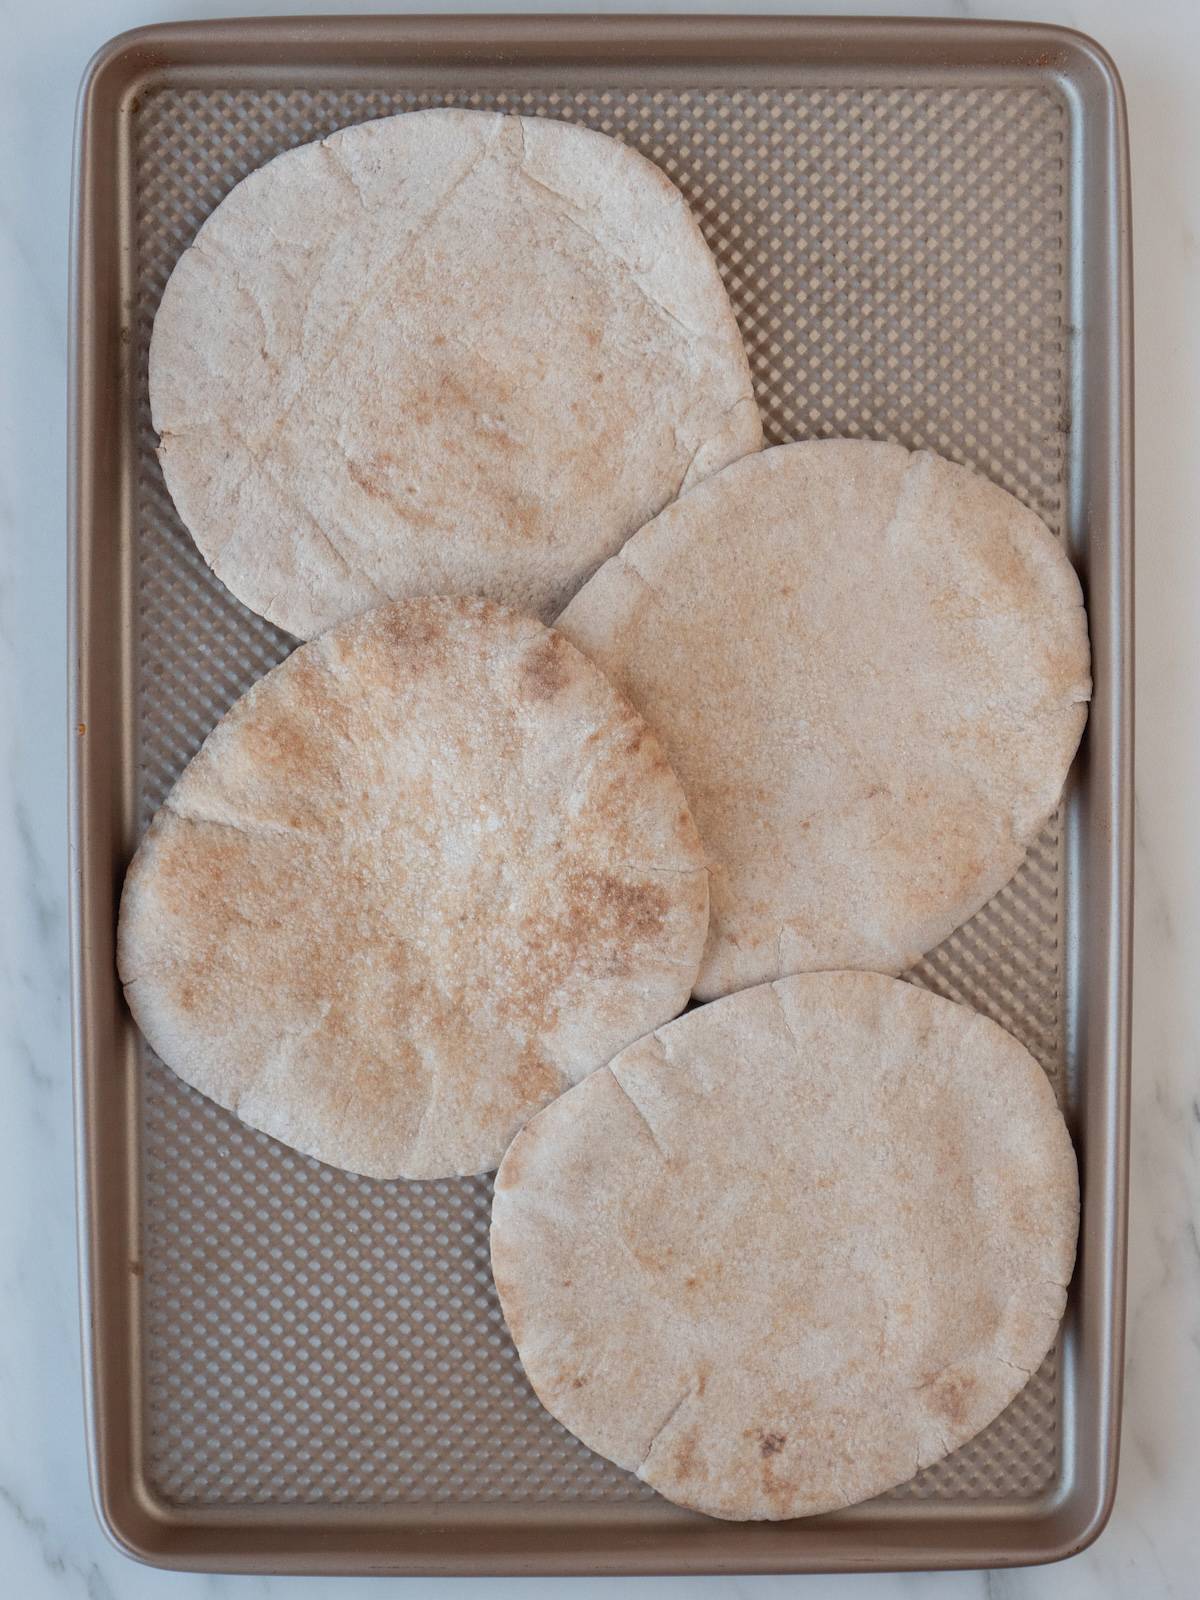 A baking sheet with whole wheat pitas laid out, slightly overlapping each other.